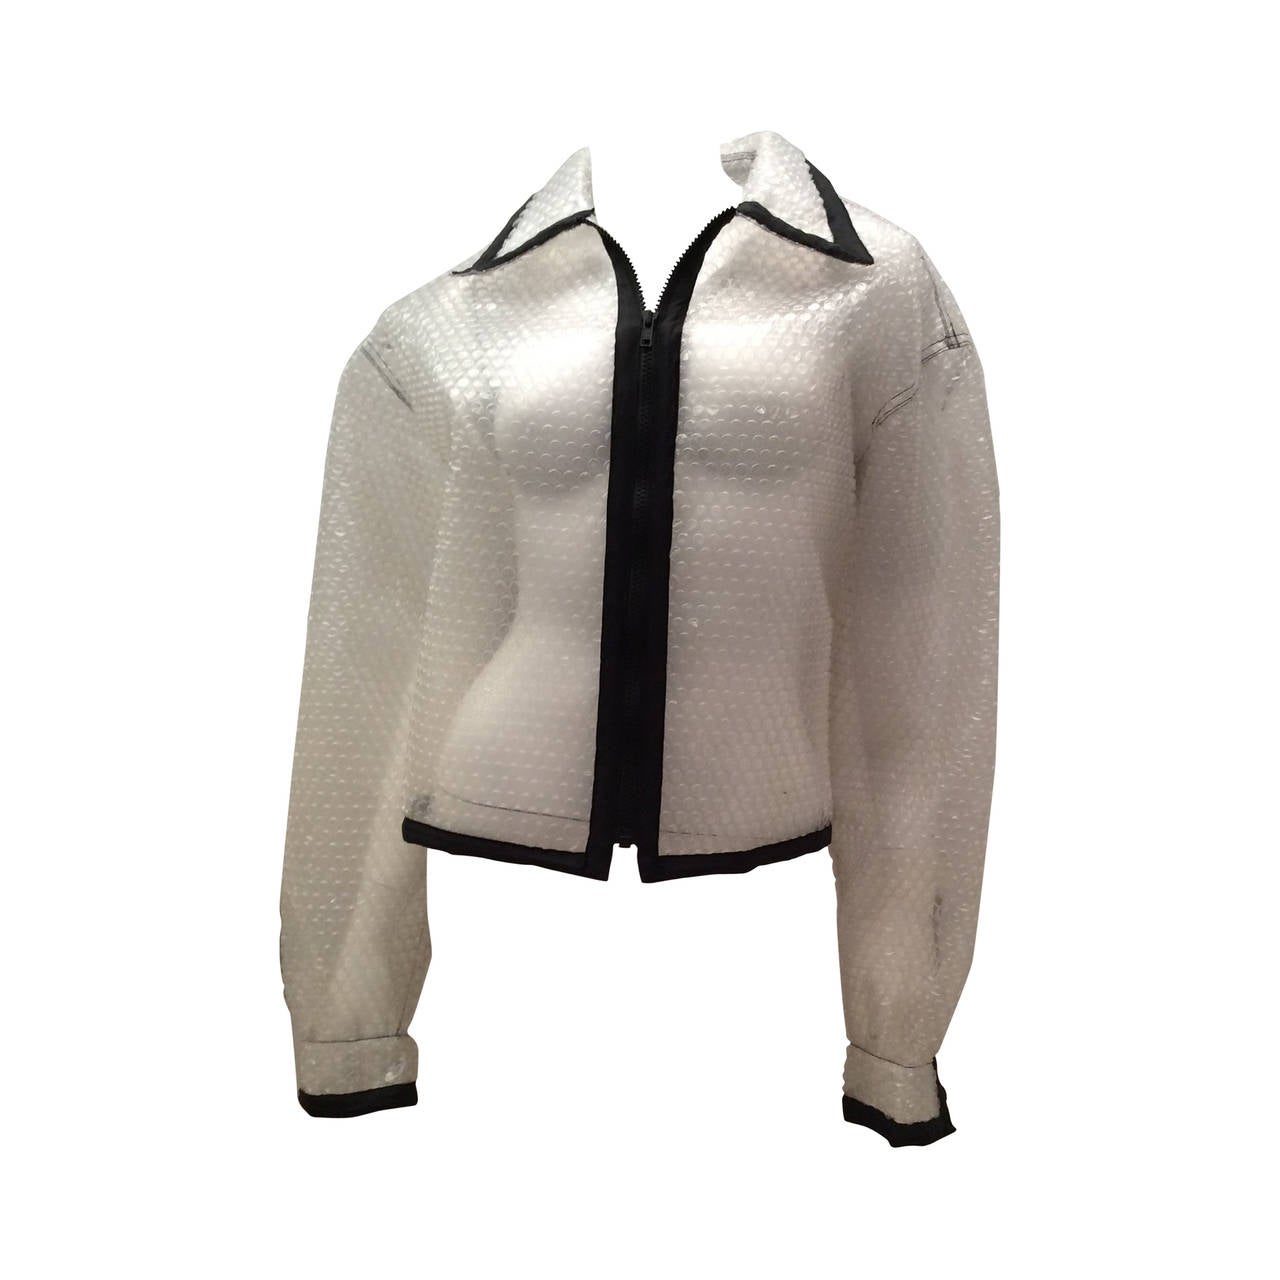 Museum Quality D and G (Dolce and Gabbana) Bubble Wrap Jacket For Sale